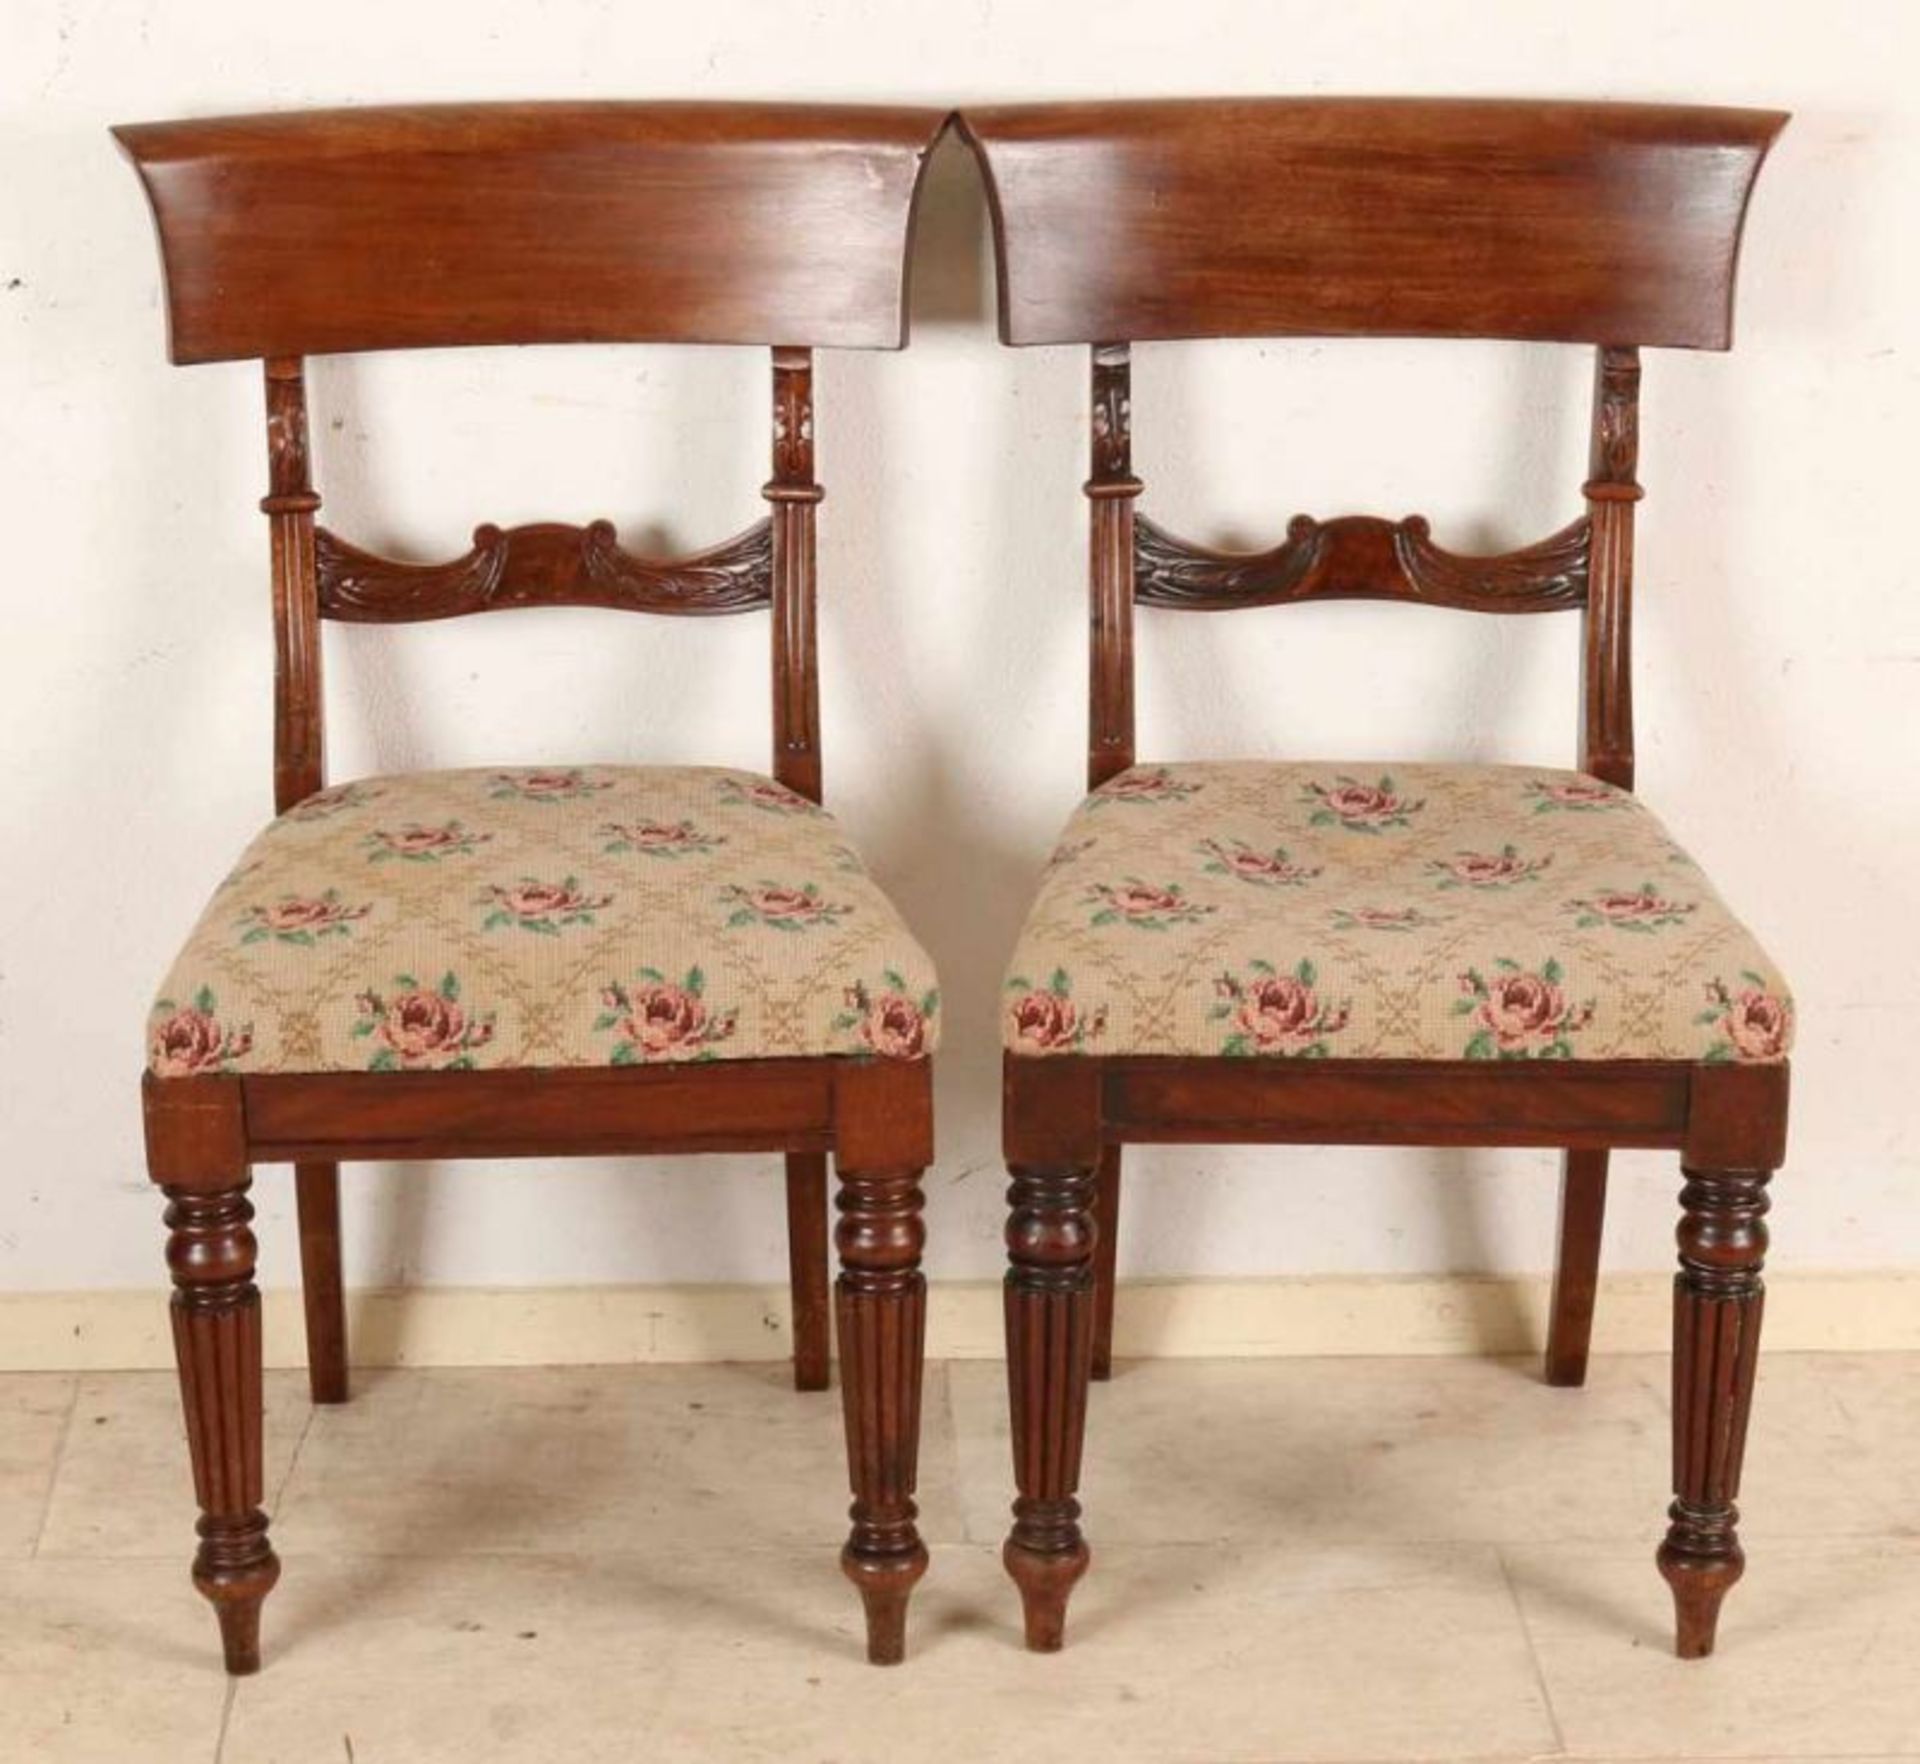 Four 19th century English mahogany chairs with petit point upholstery. Size: 90 x 54 x 44 cm. In - Bild 2 aus 2